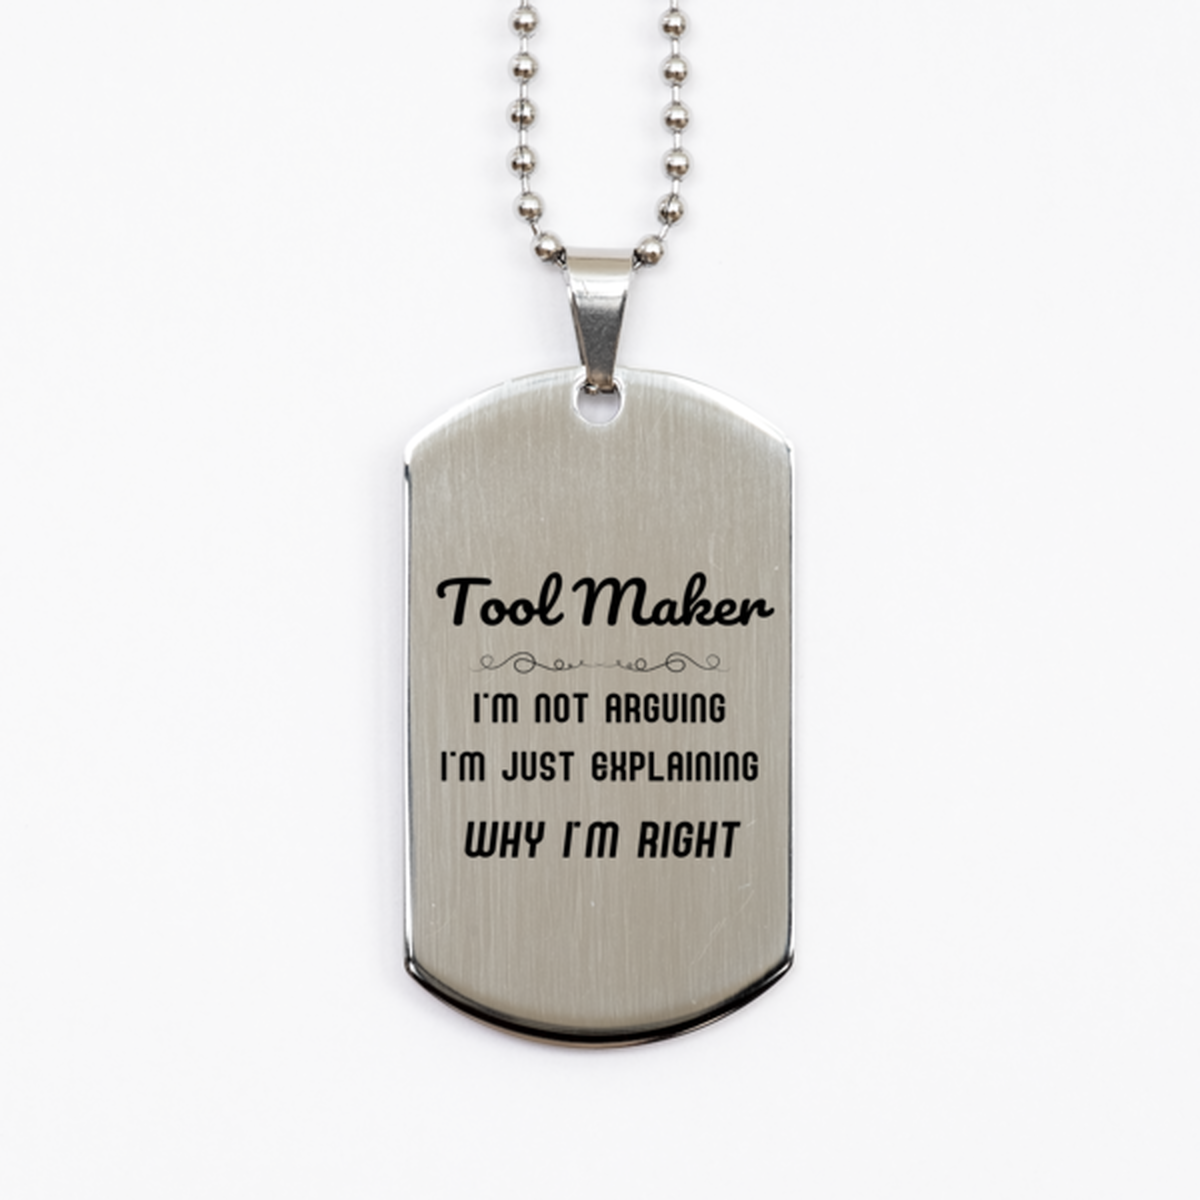 Tool Maker I'm not Arguing. I'm Just Explaining Why I'm RIGHT Silver Dog Tag, Funny Saying Quote Tool Maker Gifts For Tool Maker Graduation Birthday Christmas Gifts for Men Women Coworker